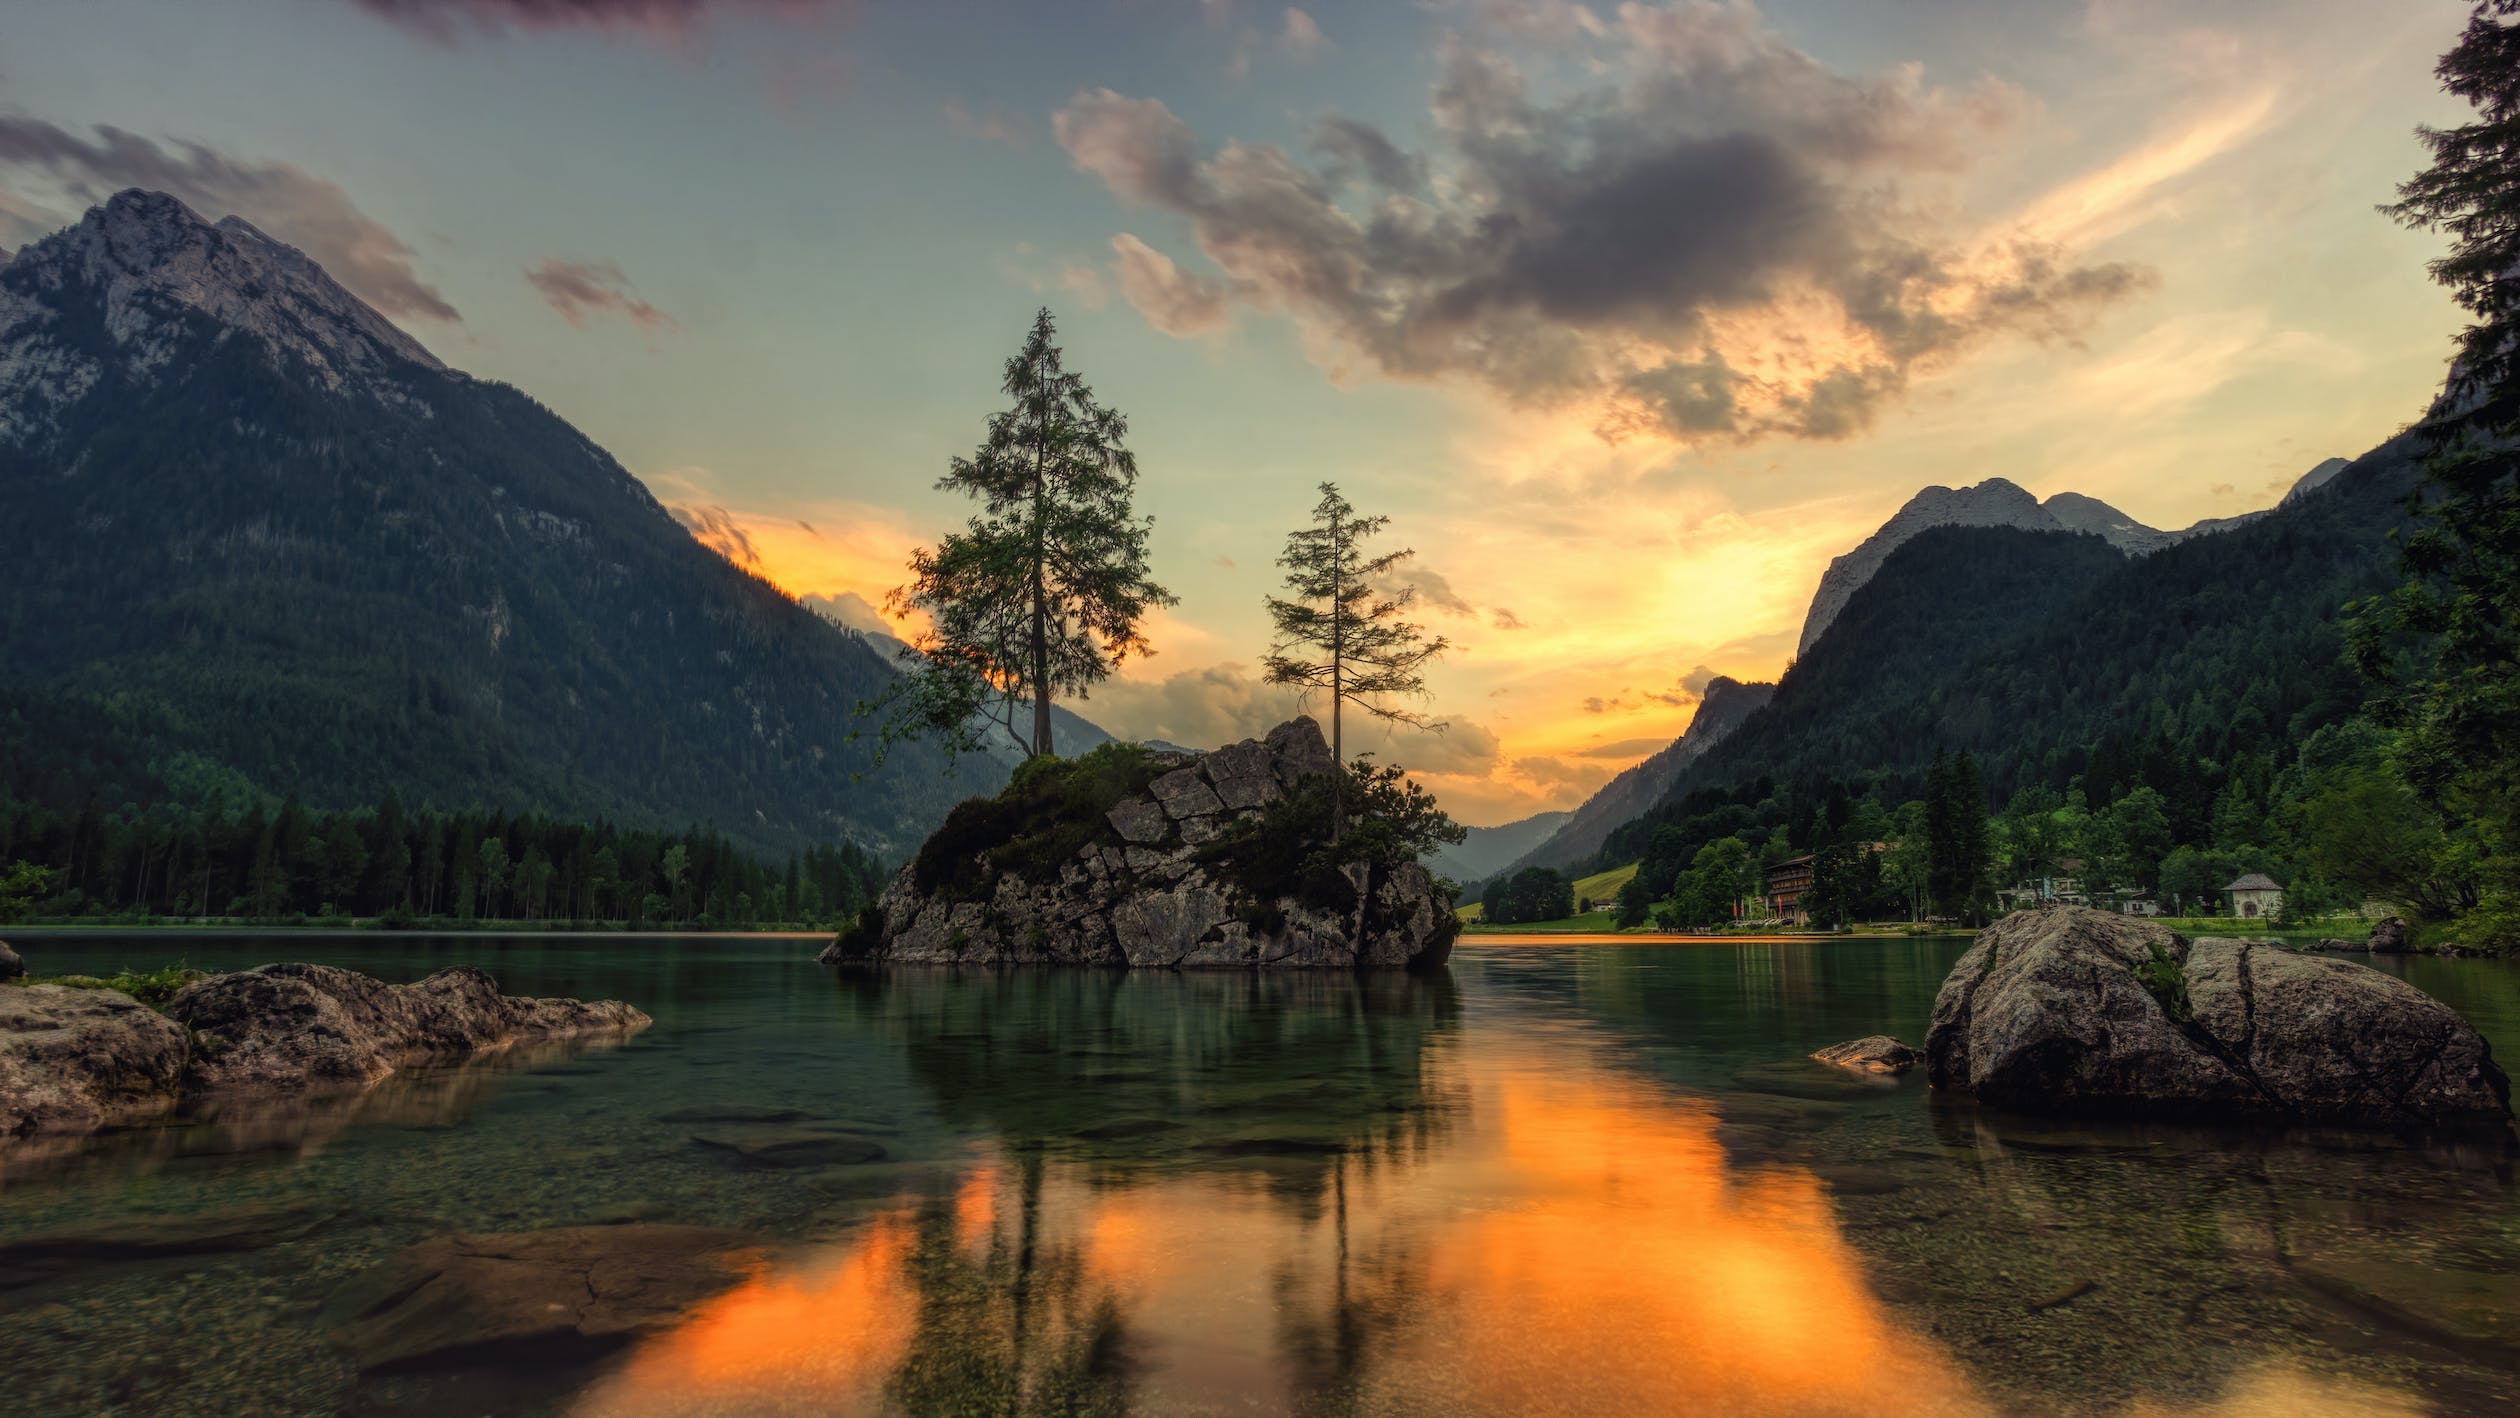 Lake surrounded by mountains at sunrise